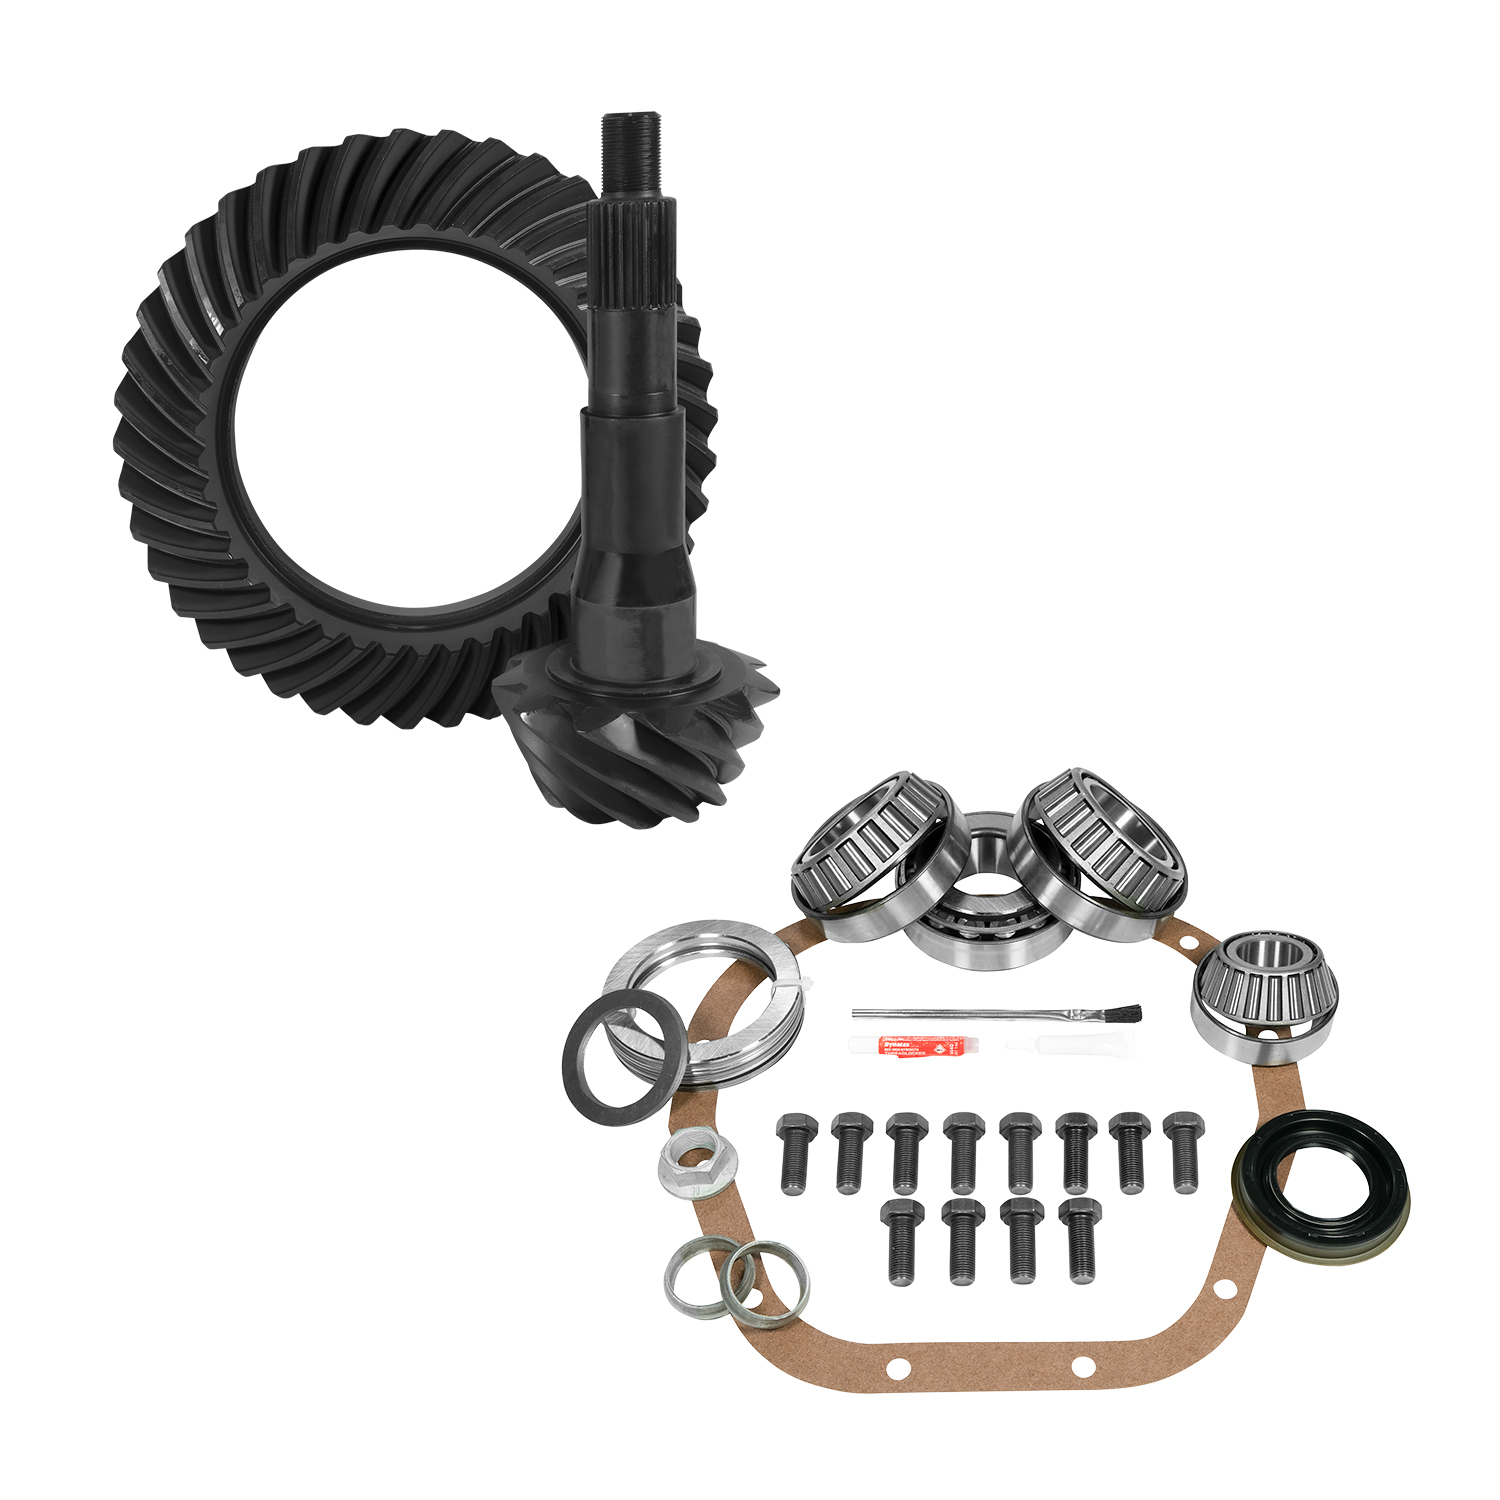 10.5" Ford 4.11 Rear Ring & Pinion and Install Kit 